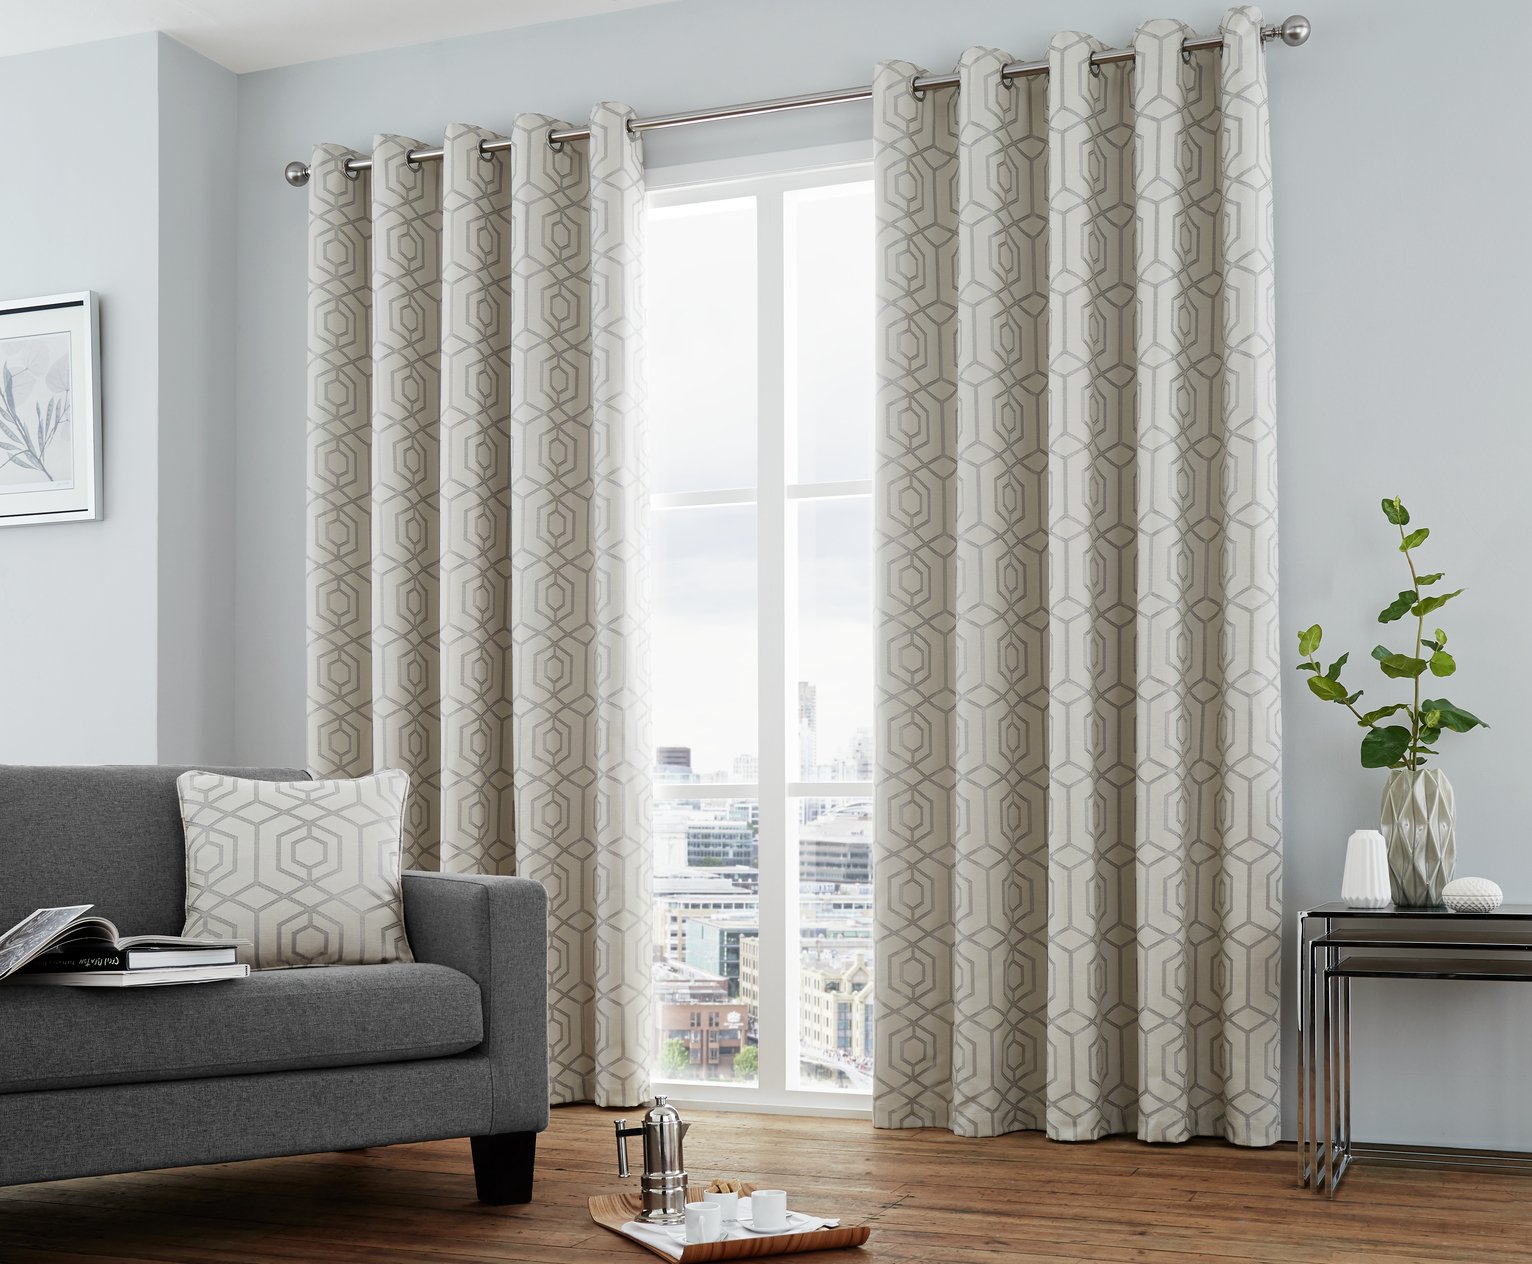 Curtina Camberwell Eyelet Curtains - 229x183cm - Silver